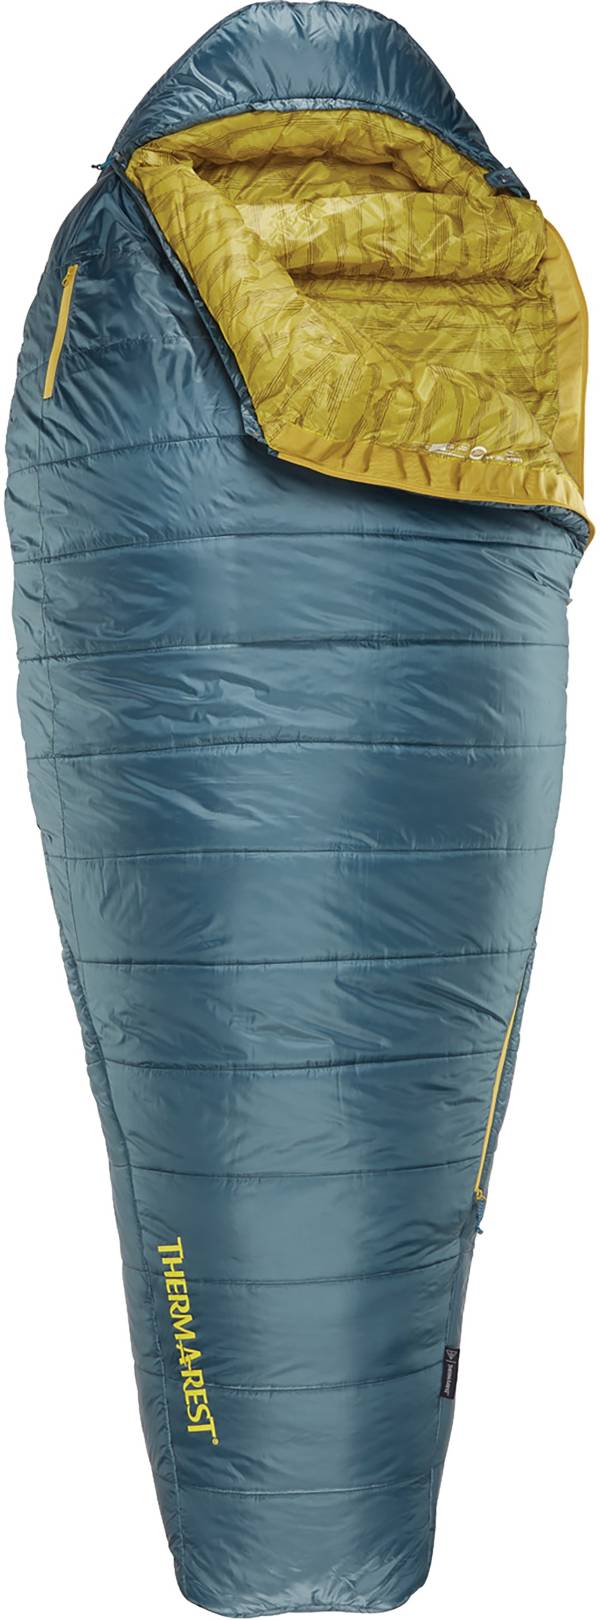 Therm-a-Rest Saros 20 Sleeping Bag product image